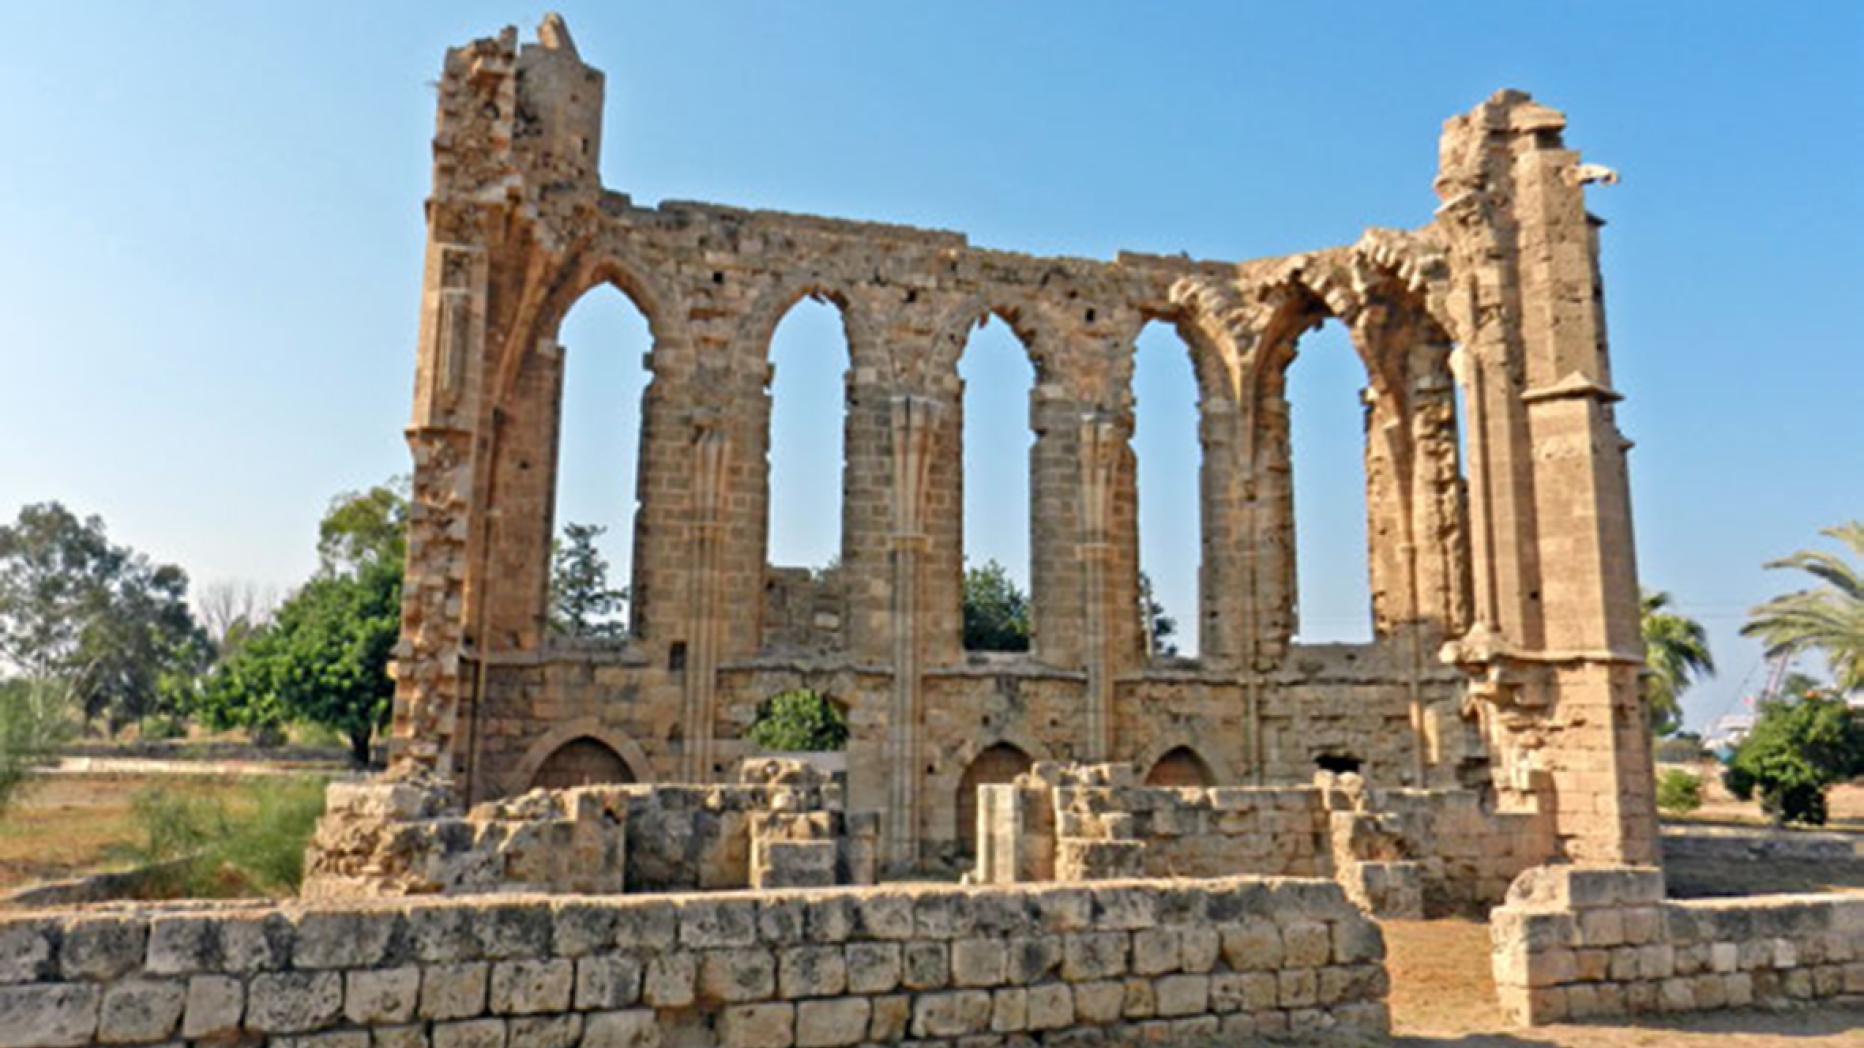 The ruins of the Church of St. George of the Latins, Famagusta